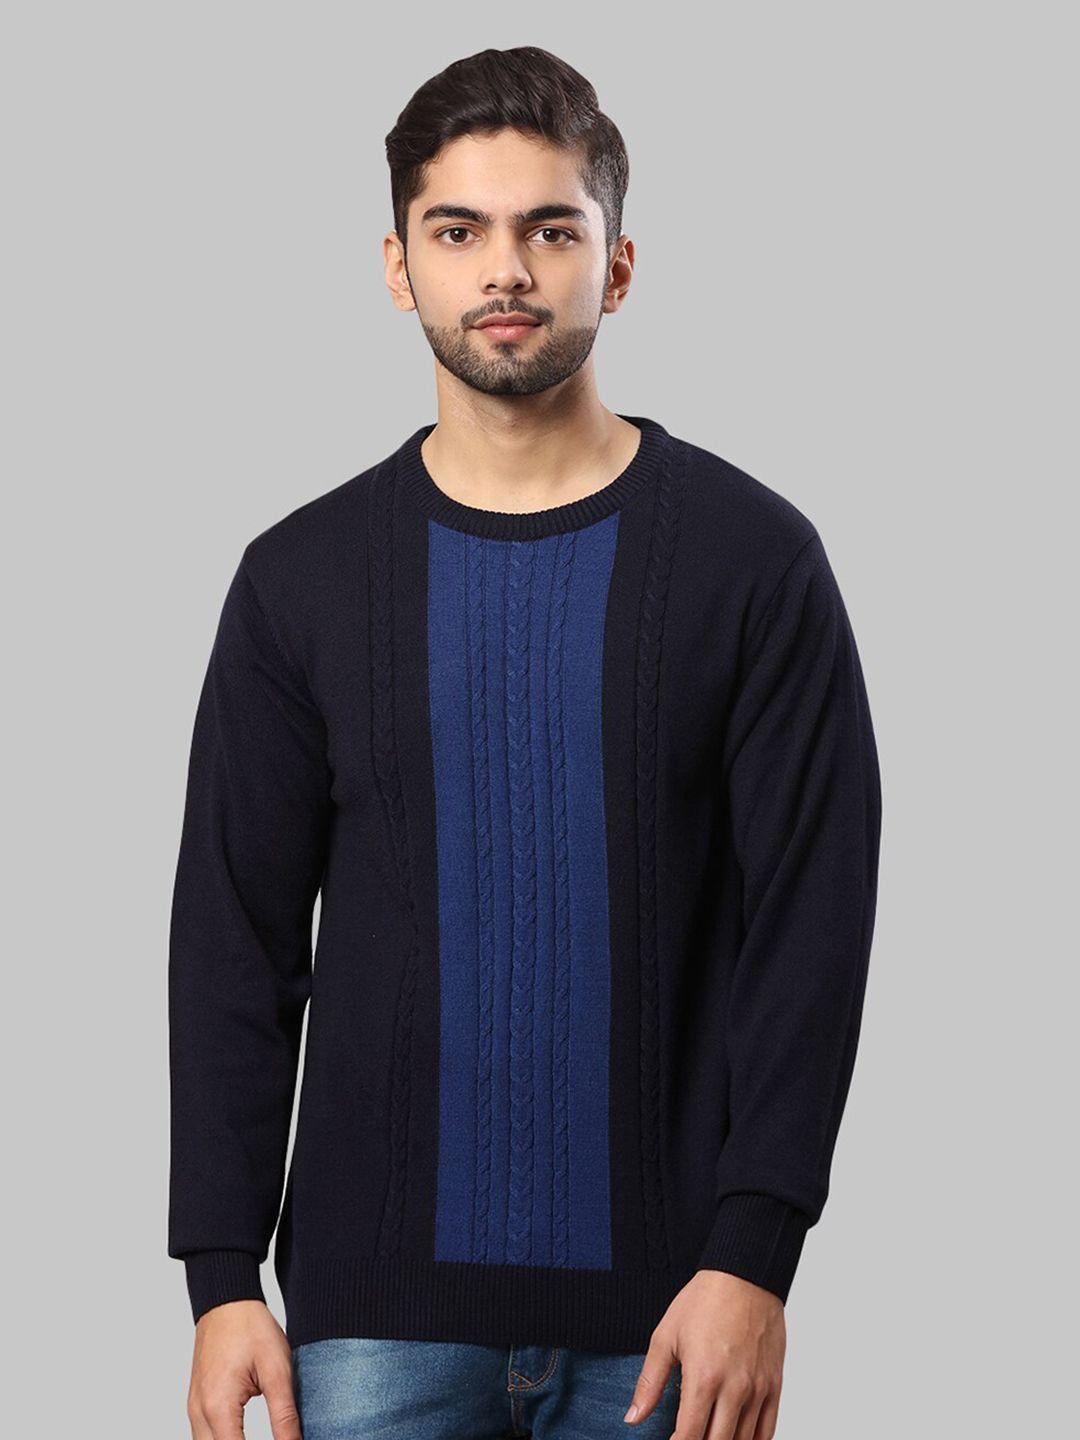 raymond-men-navy-blue-&-blue-cable-knit-pullover-sweater